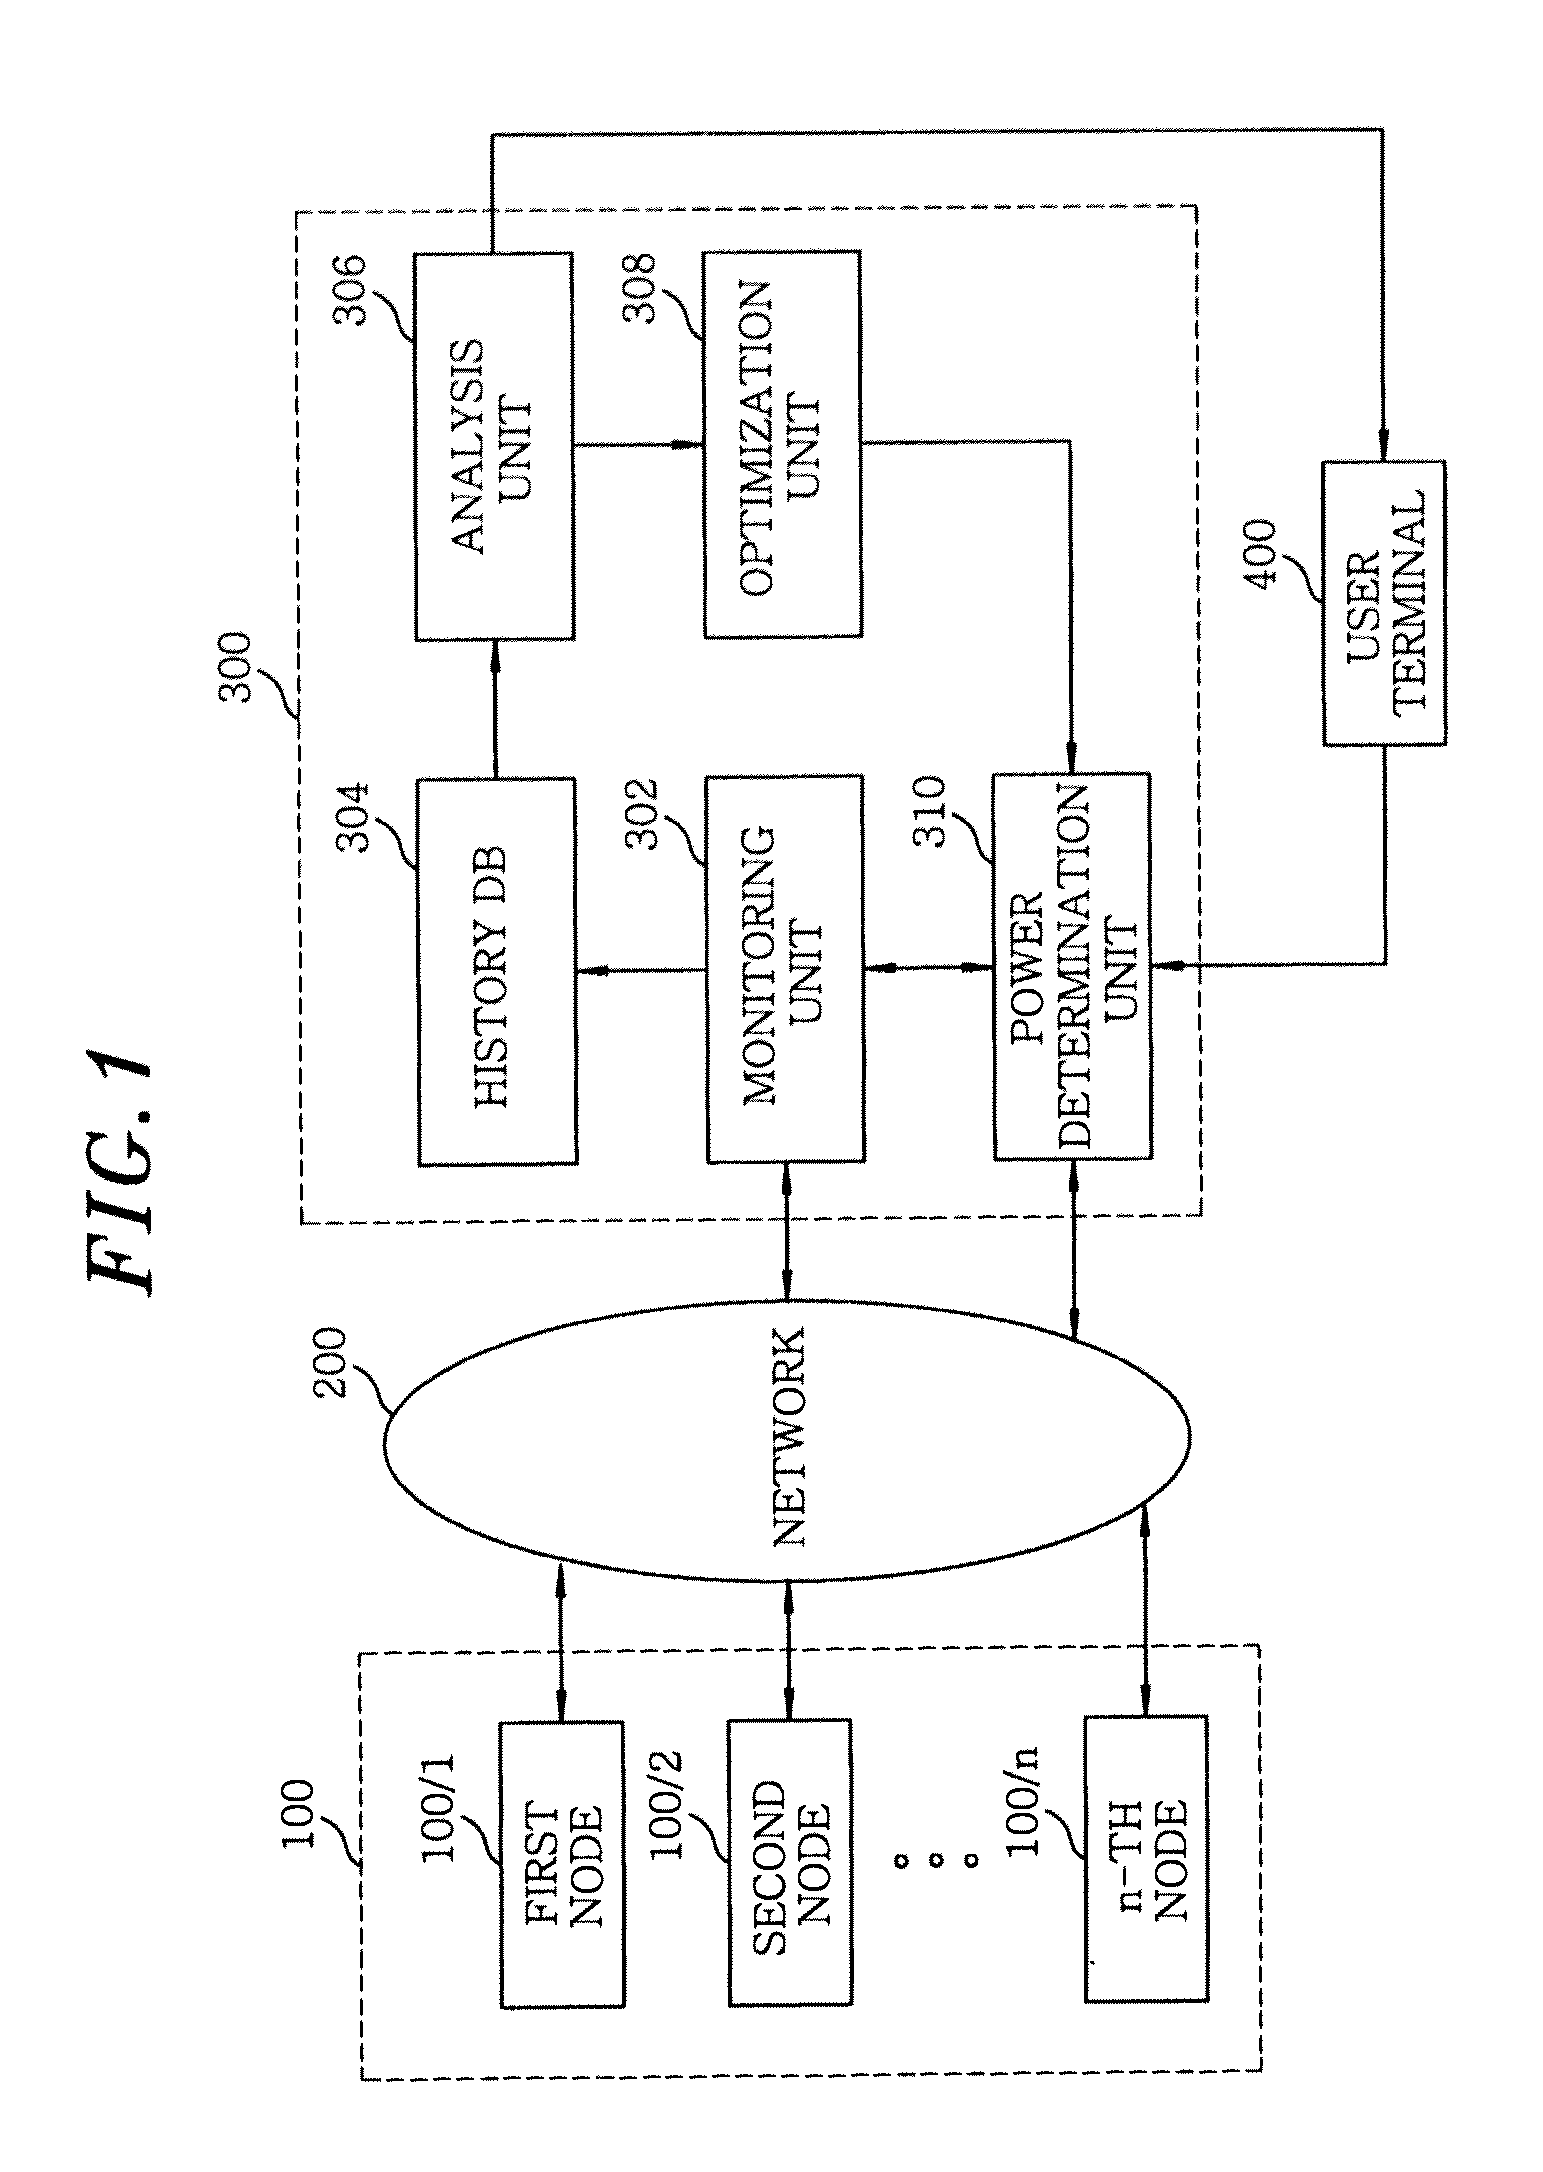 Power control apparatus and method for cluster system